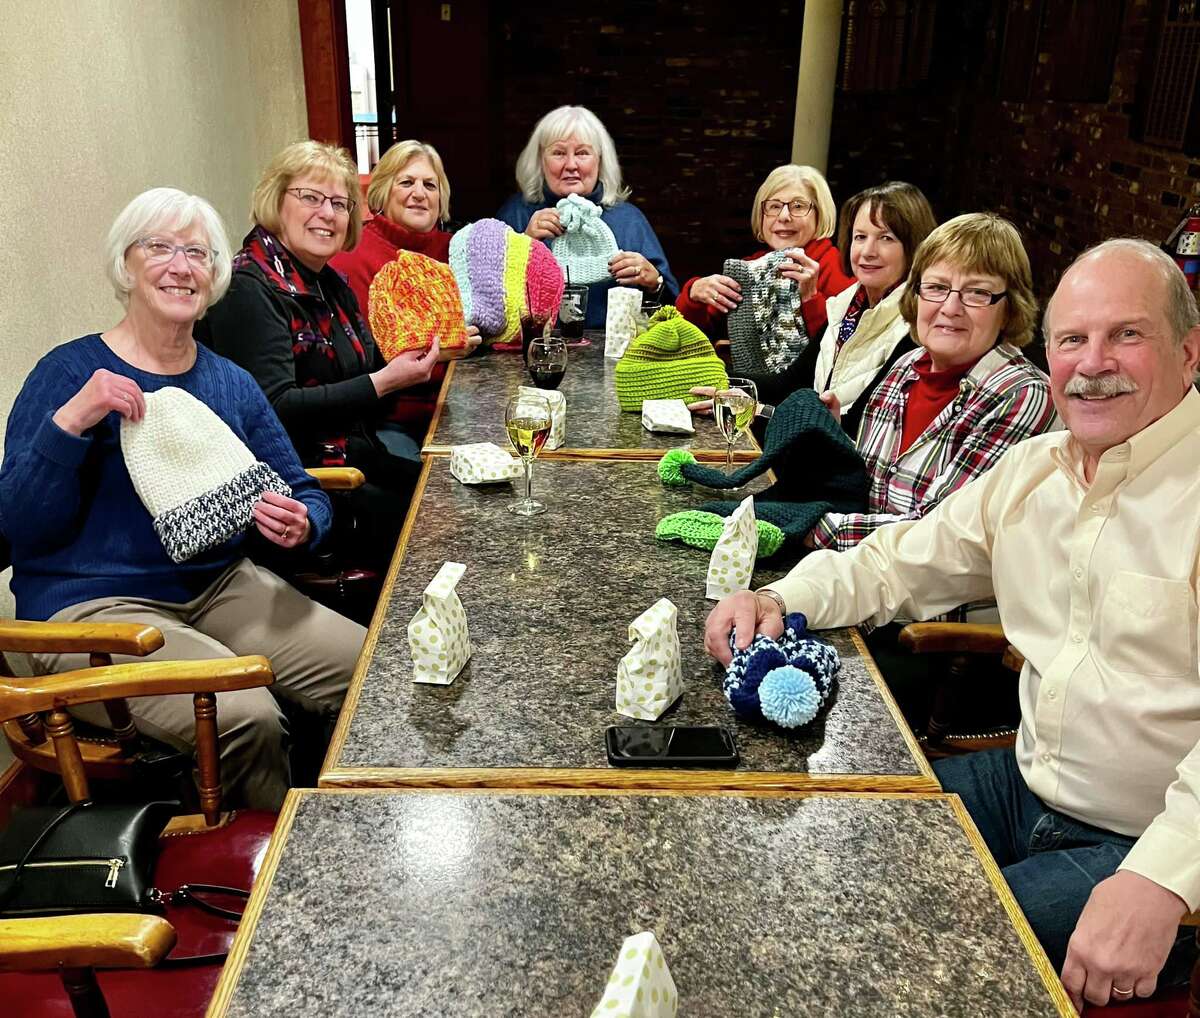 Friendly Hands Food Bank received a collection of handmade hats, scarves, mittens and blankets from the Elks Club Knitters.